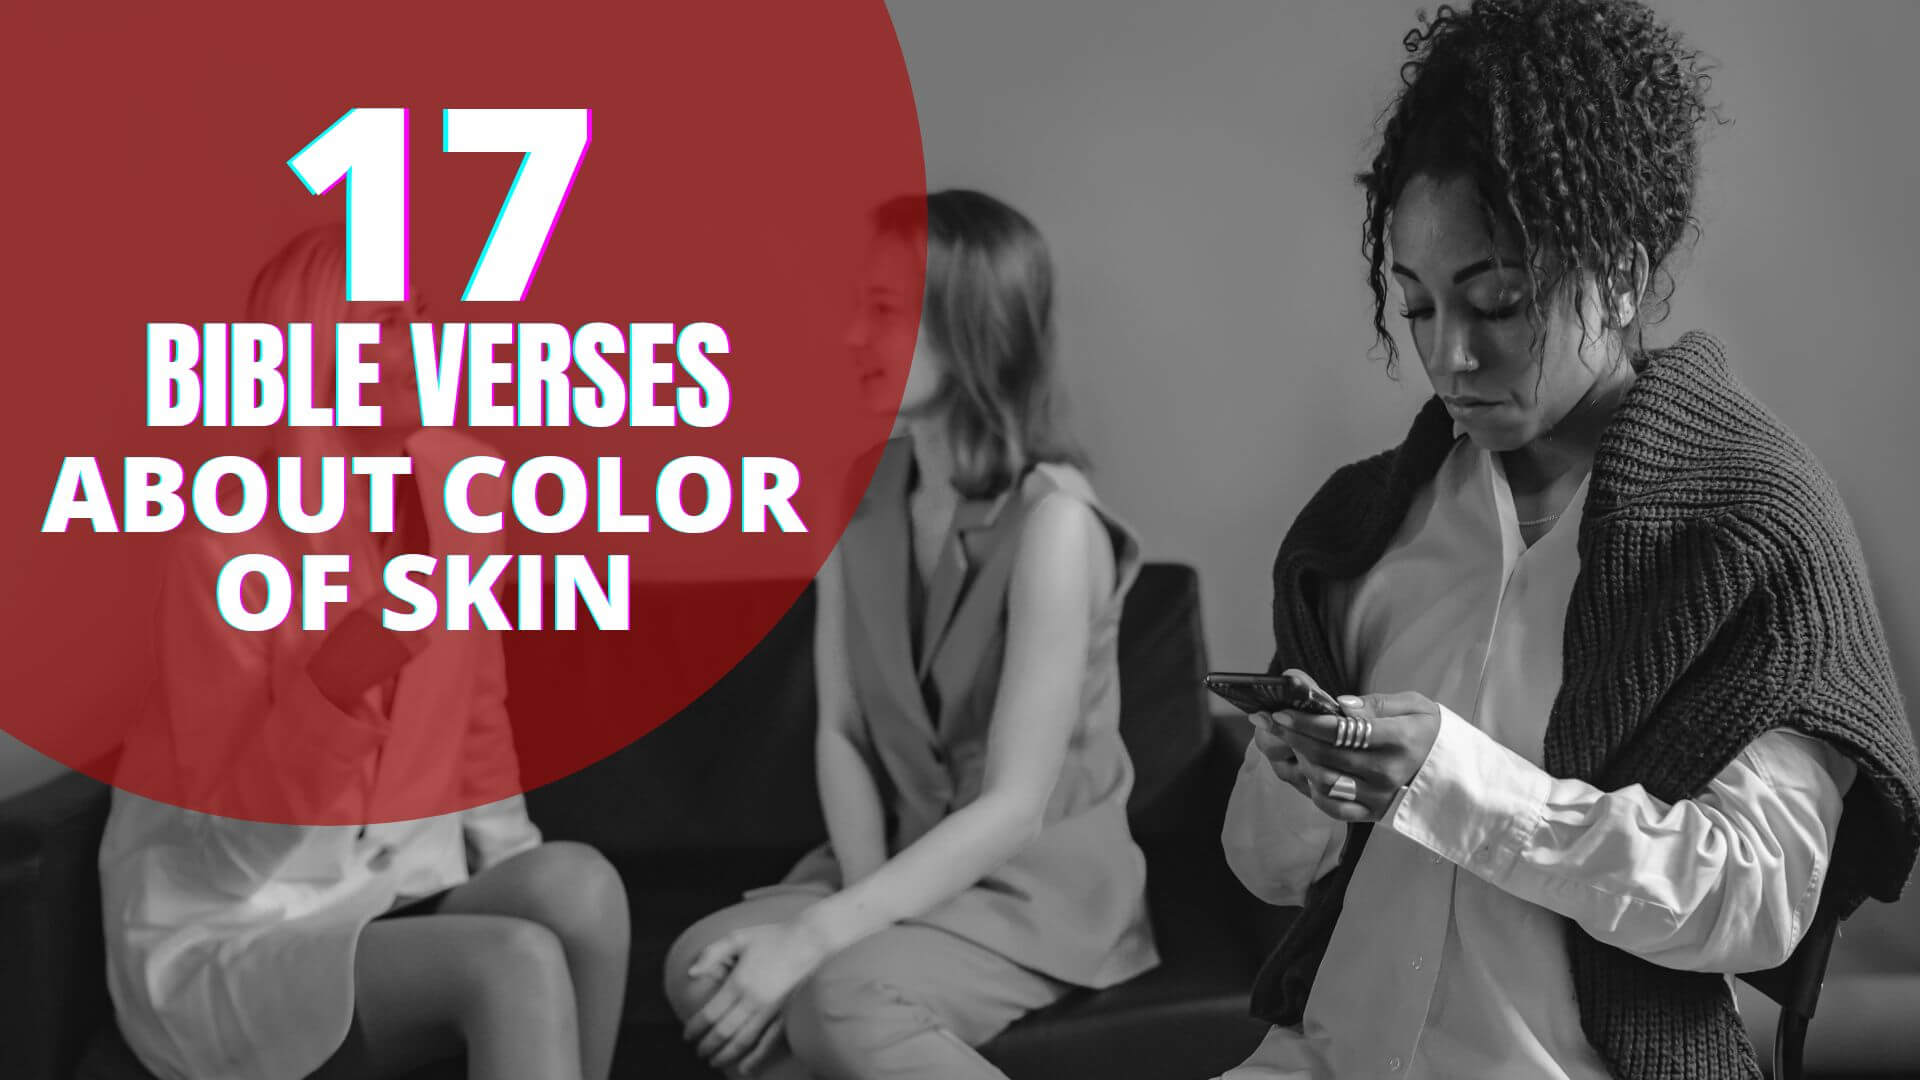 Bible verses about color of skin